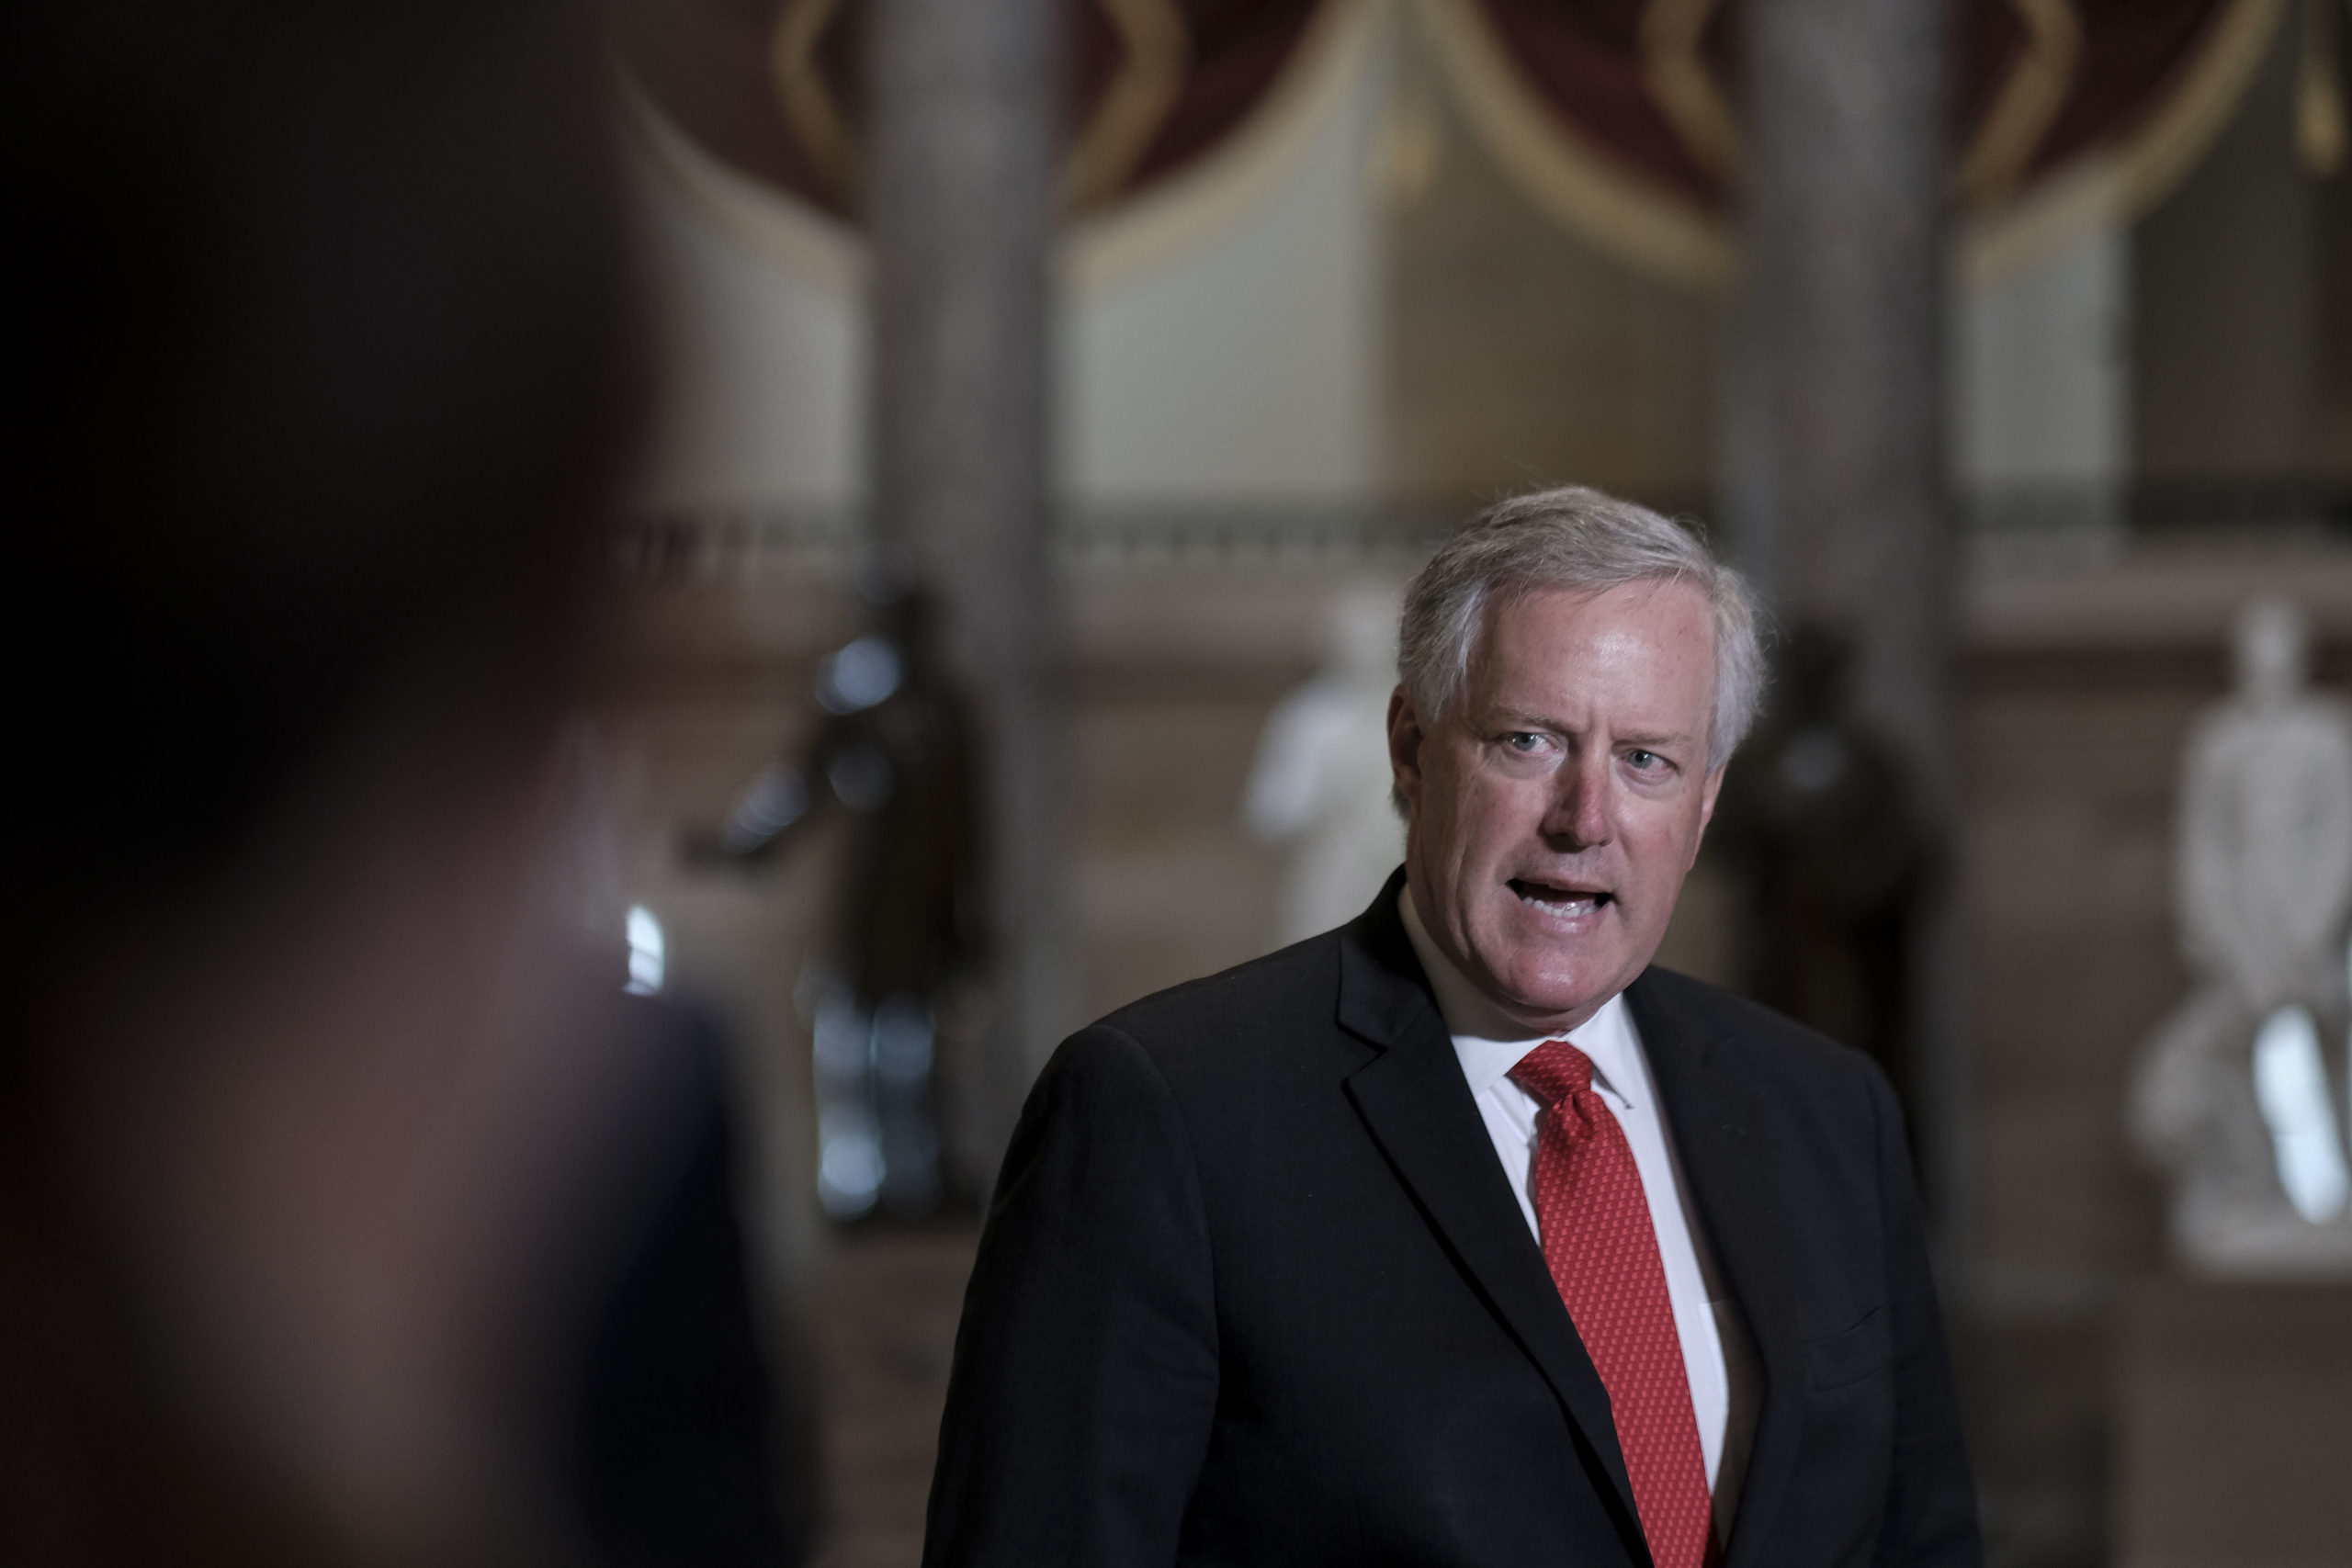 White House Chief of Staff Mark Meadows speaks to the press in Statuary Hall at the Capitol on August 22, 2020. (Gabriella Demczuk/Getty Images)